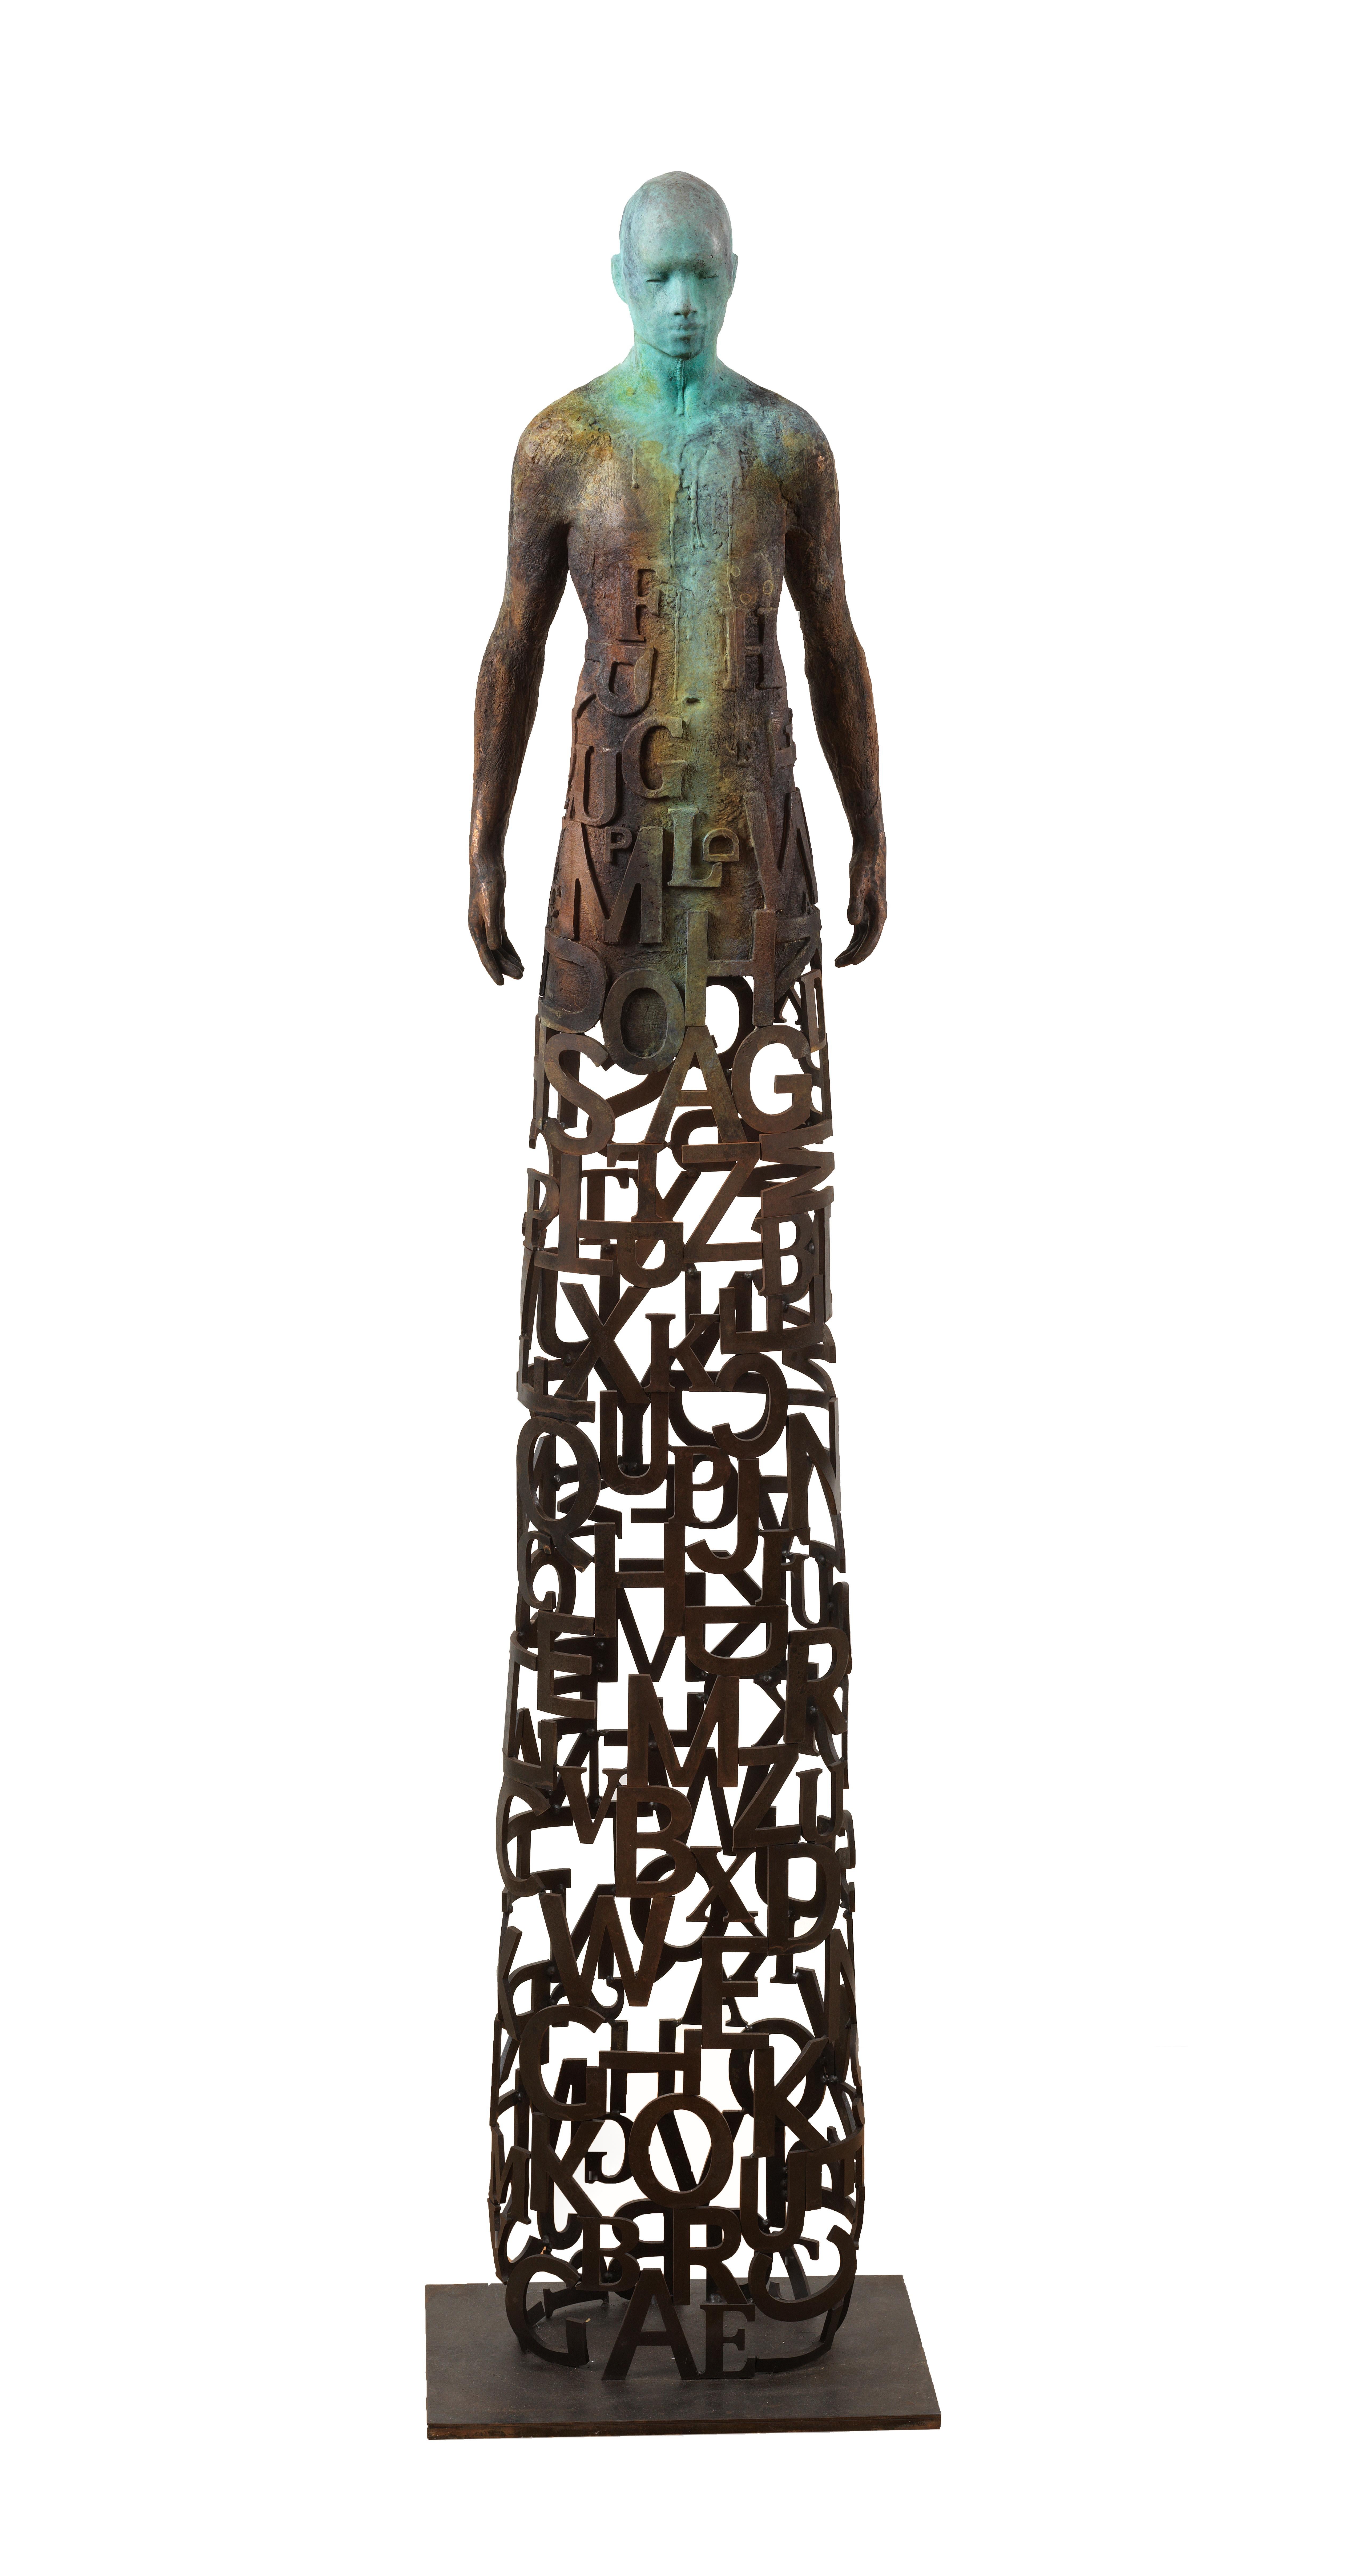 Jesus Curia Perez Figurative Sculpture - Nuntius - Bronze and Steel Sculpture with Figure and See Through "Word" Garment